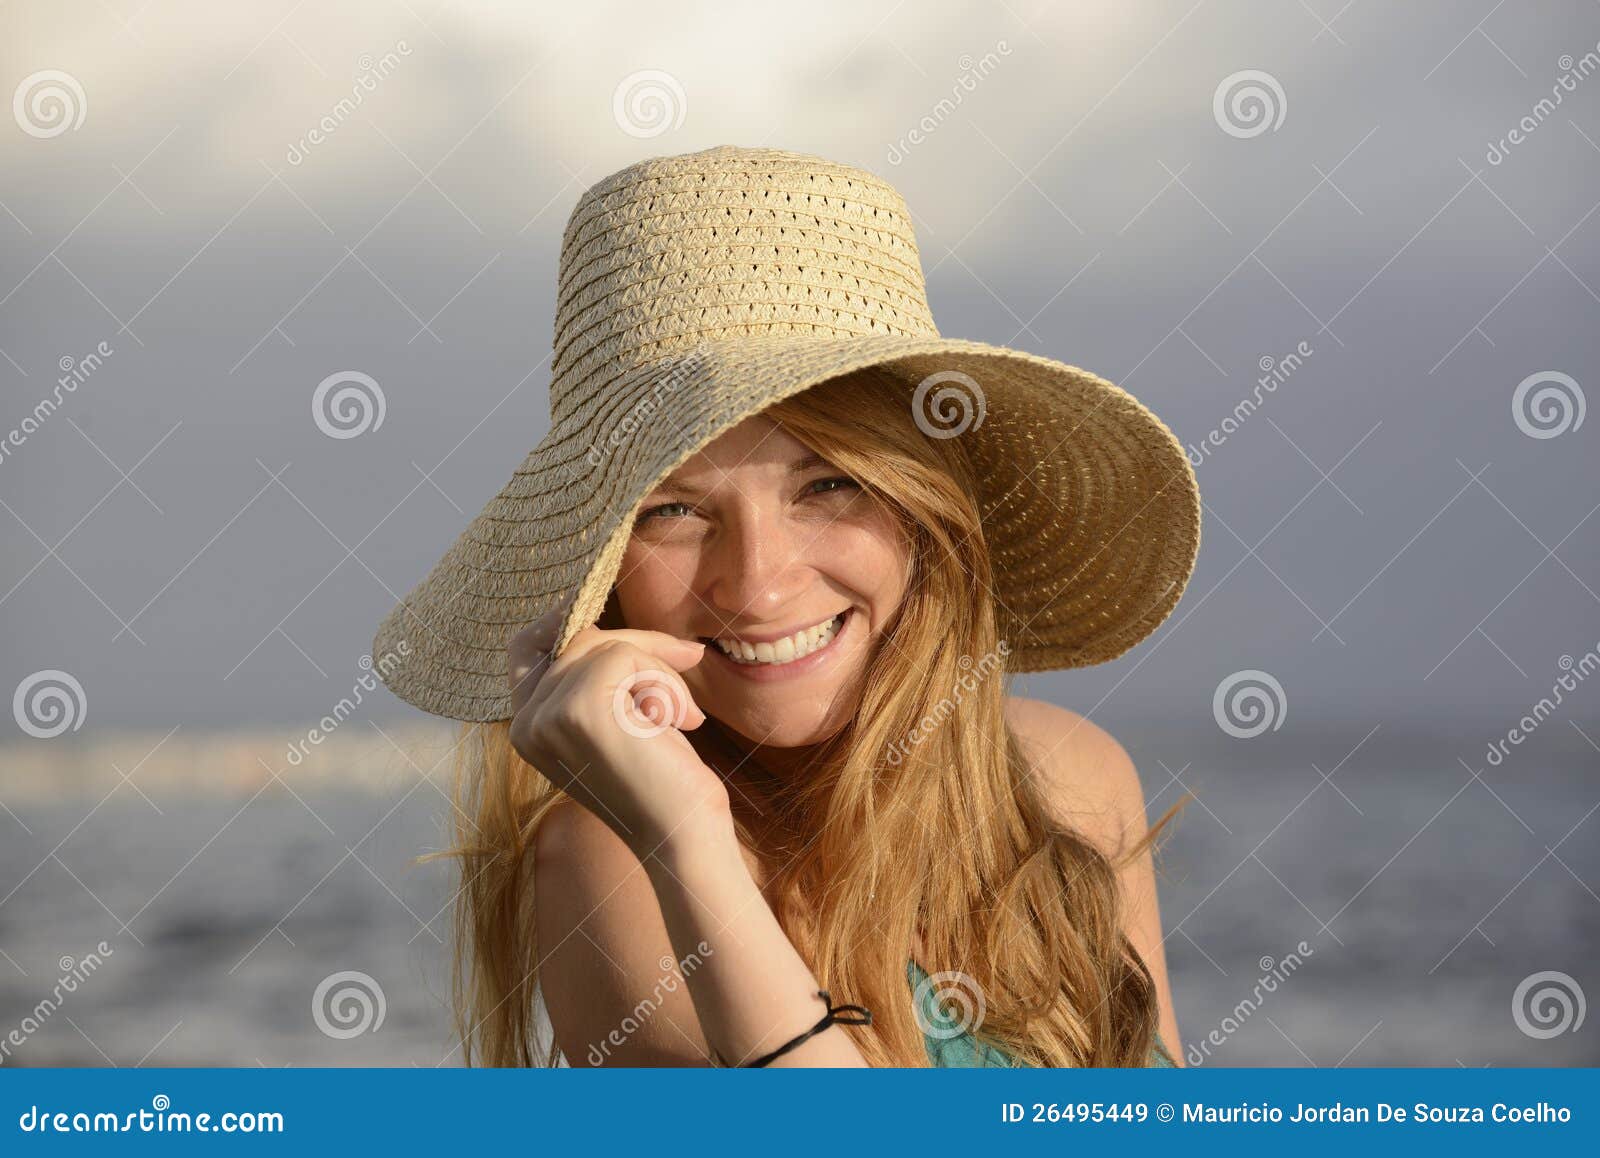 blond woman with sunhat on the beach